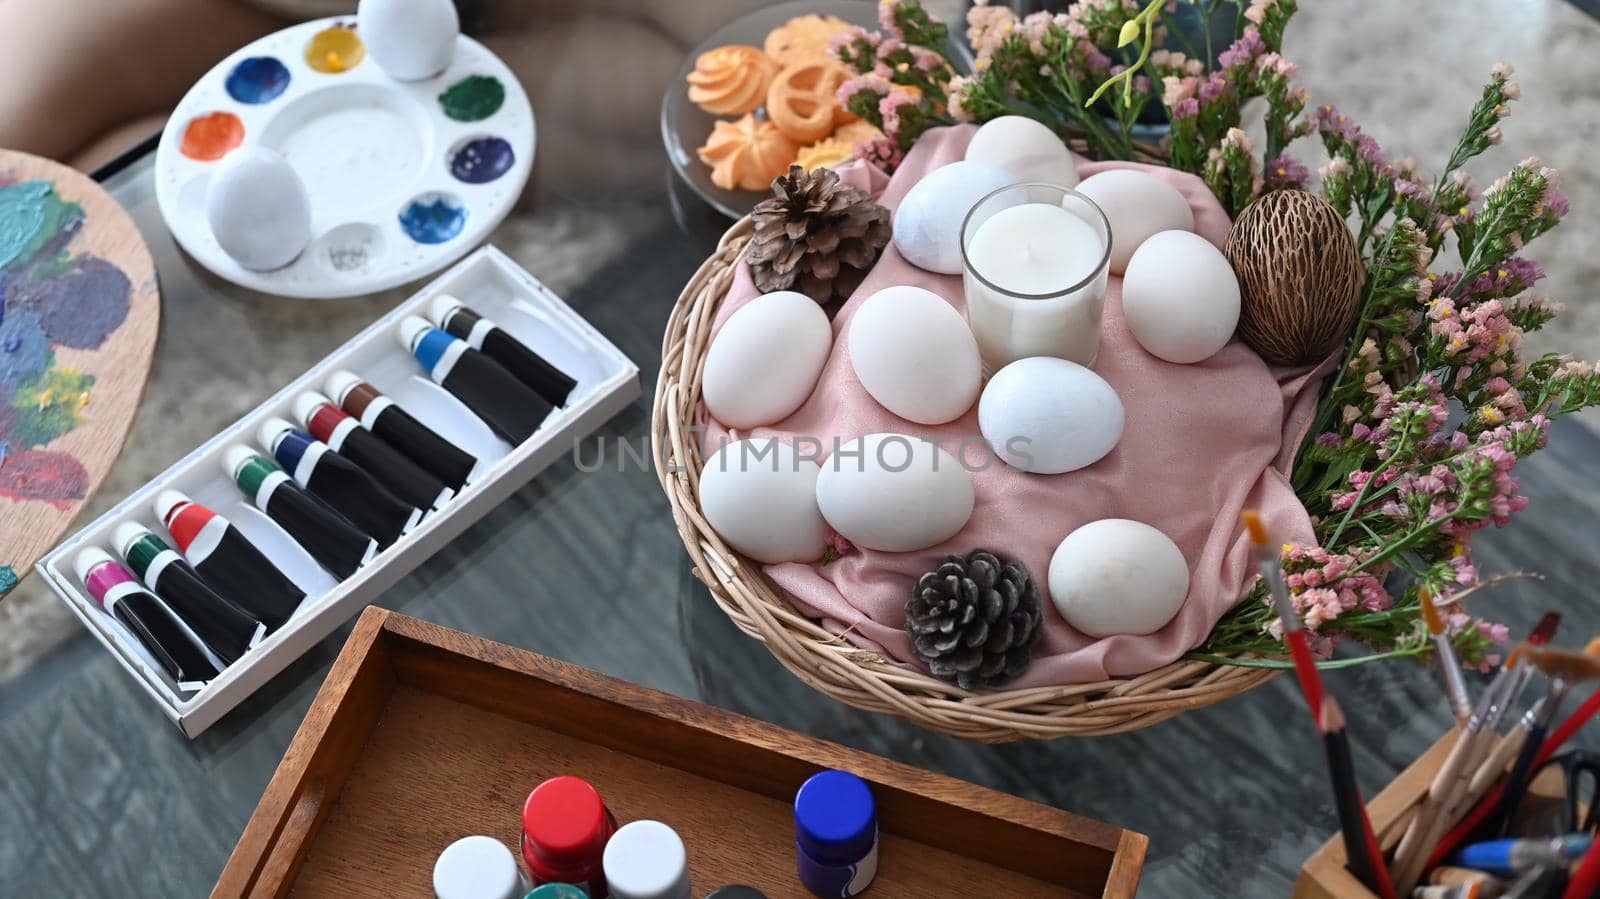 Wicker basket with eggs and spring flowers on wooden table. Easter celebration concept. by prathanchorruangsak